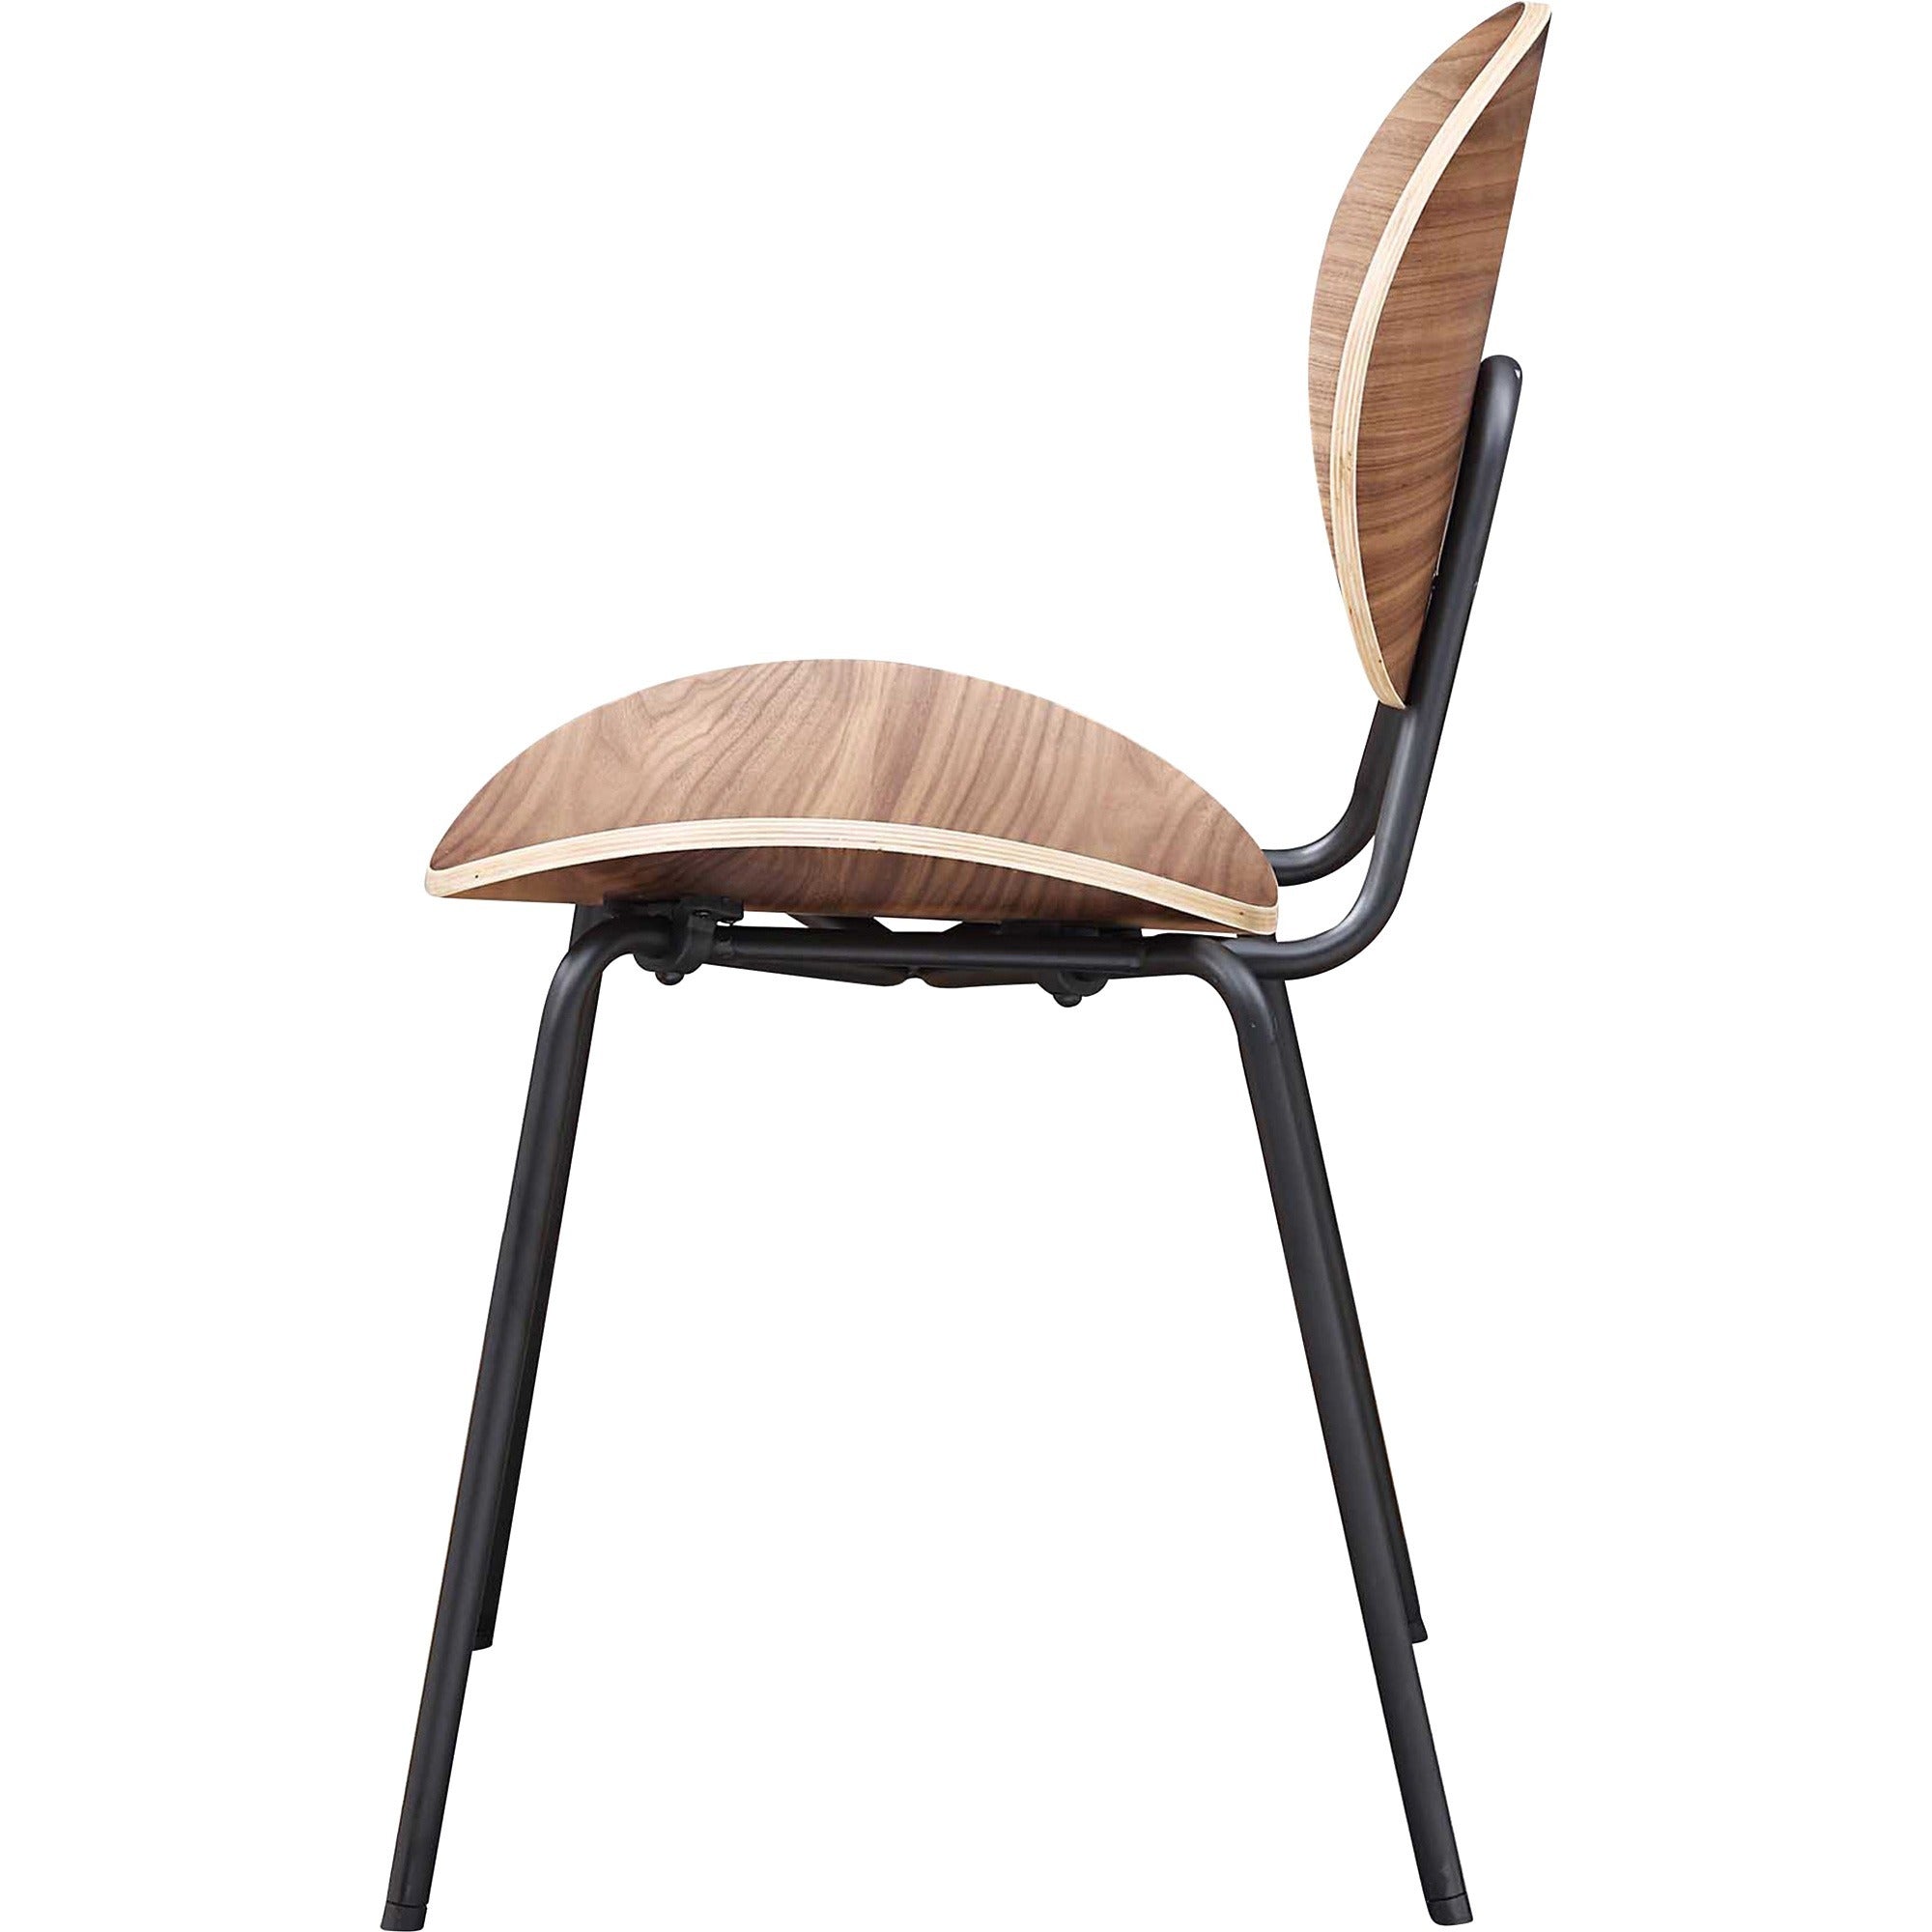 lorell-bentwood-cafe-chairs-plywood-seat-plywood-back-metal-powder-coated-steel-frame-walnut-2-carton_llr42962 - 5